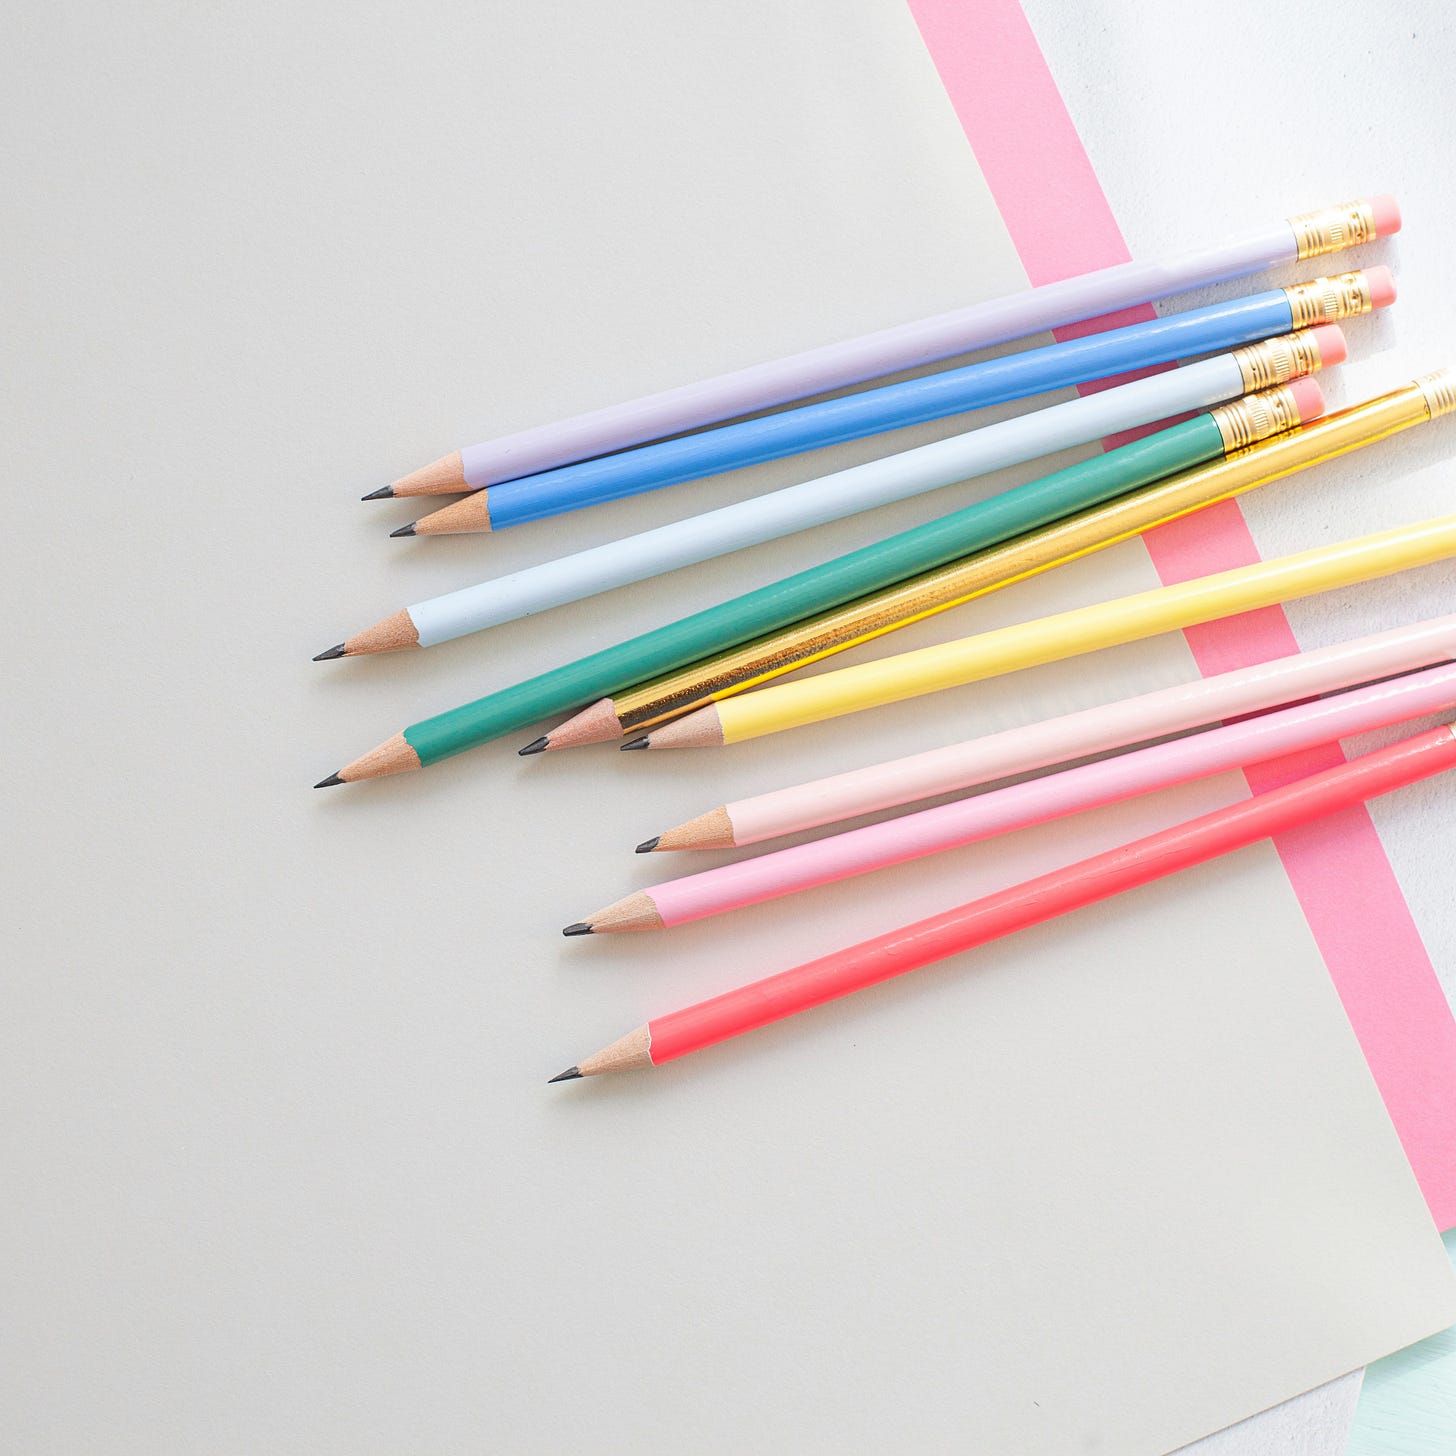 sharpened pencils with different colors on white background